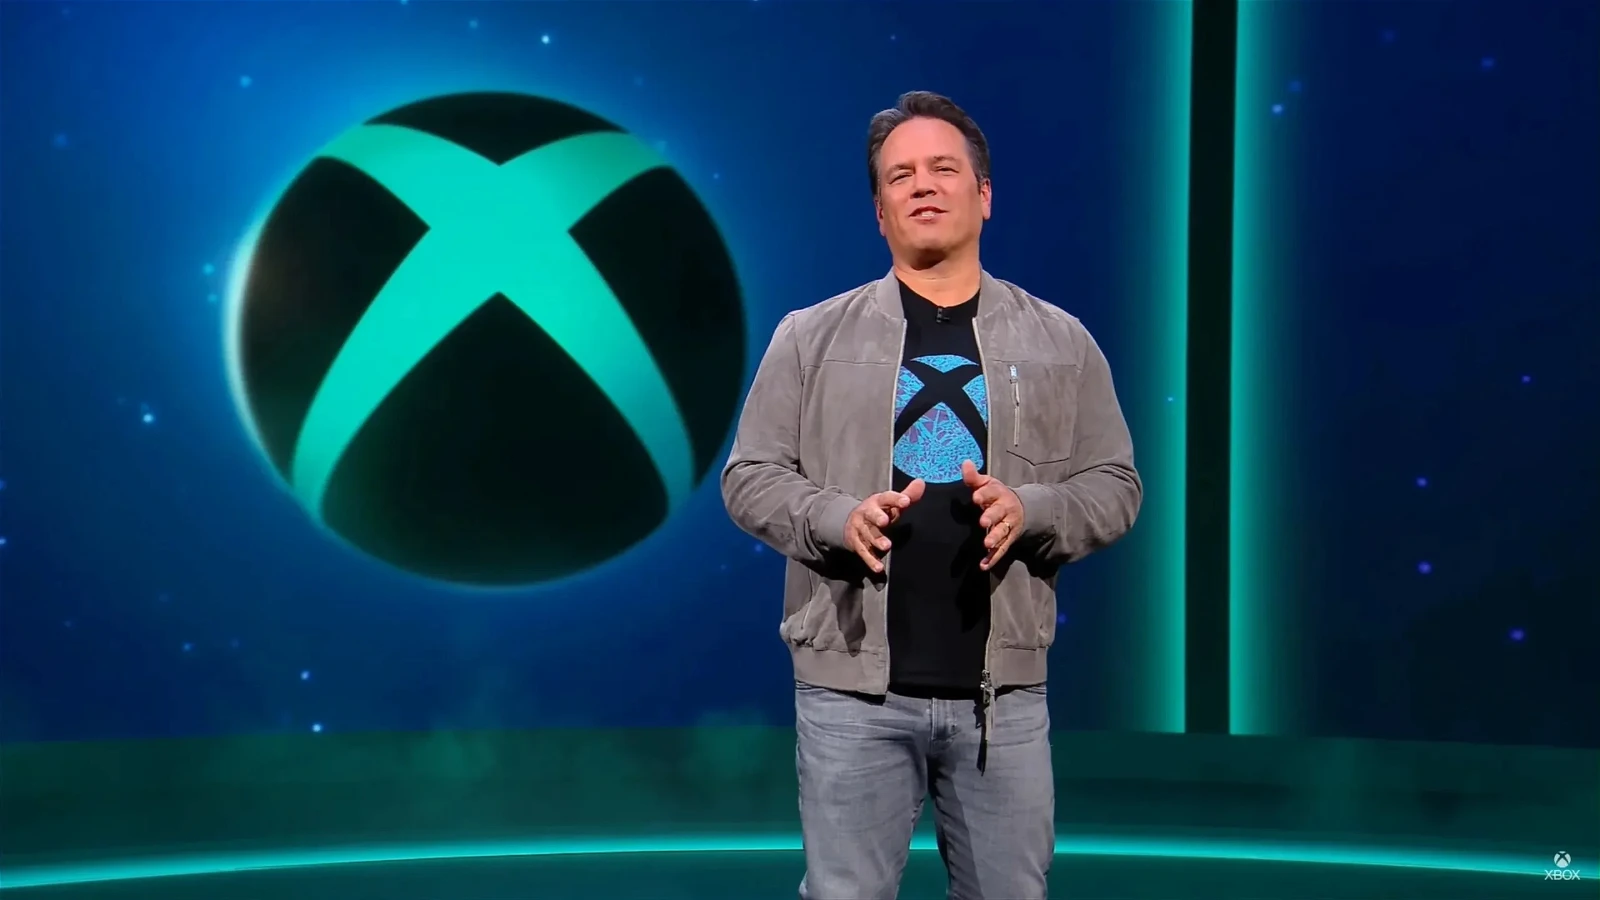 Xbox had one prestigious game that racked up lots of awards, and it proceeded to shut down the studio that made it.